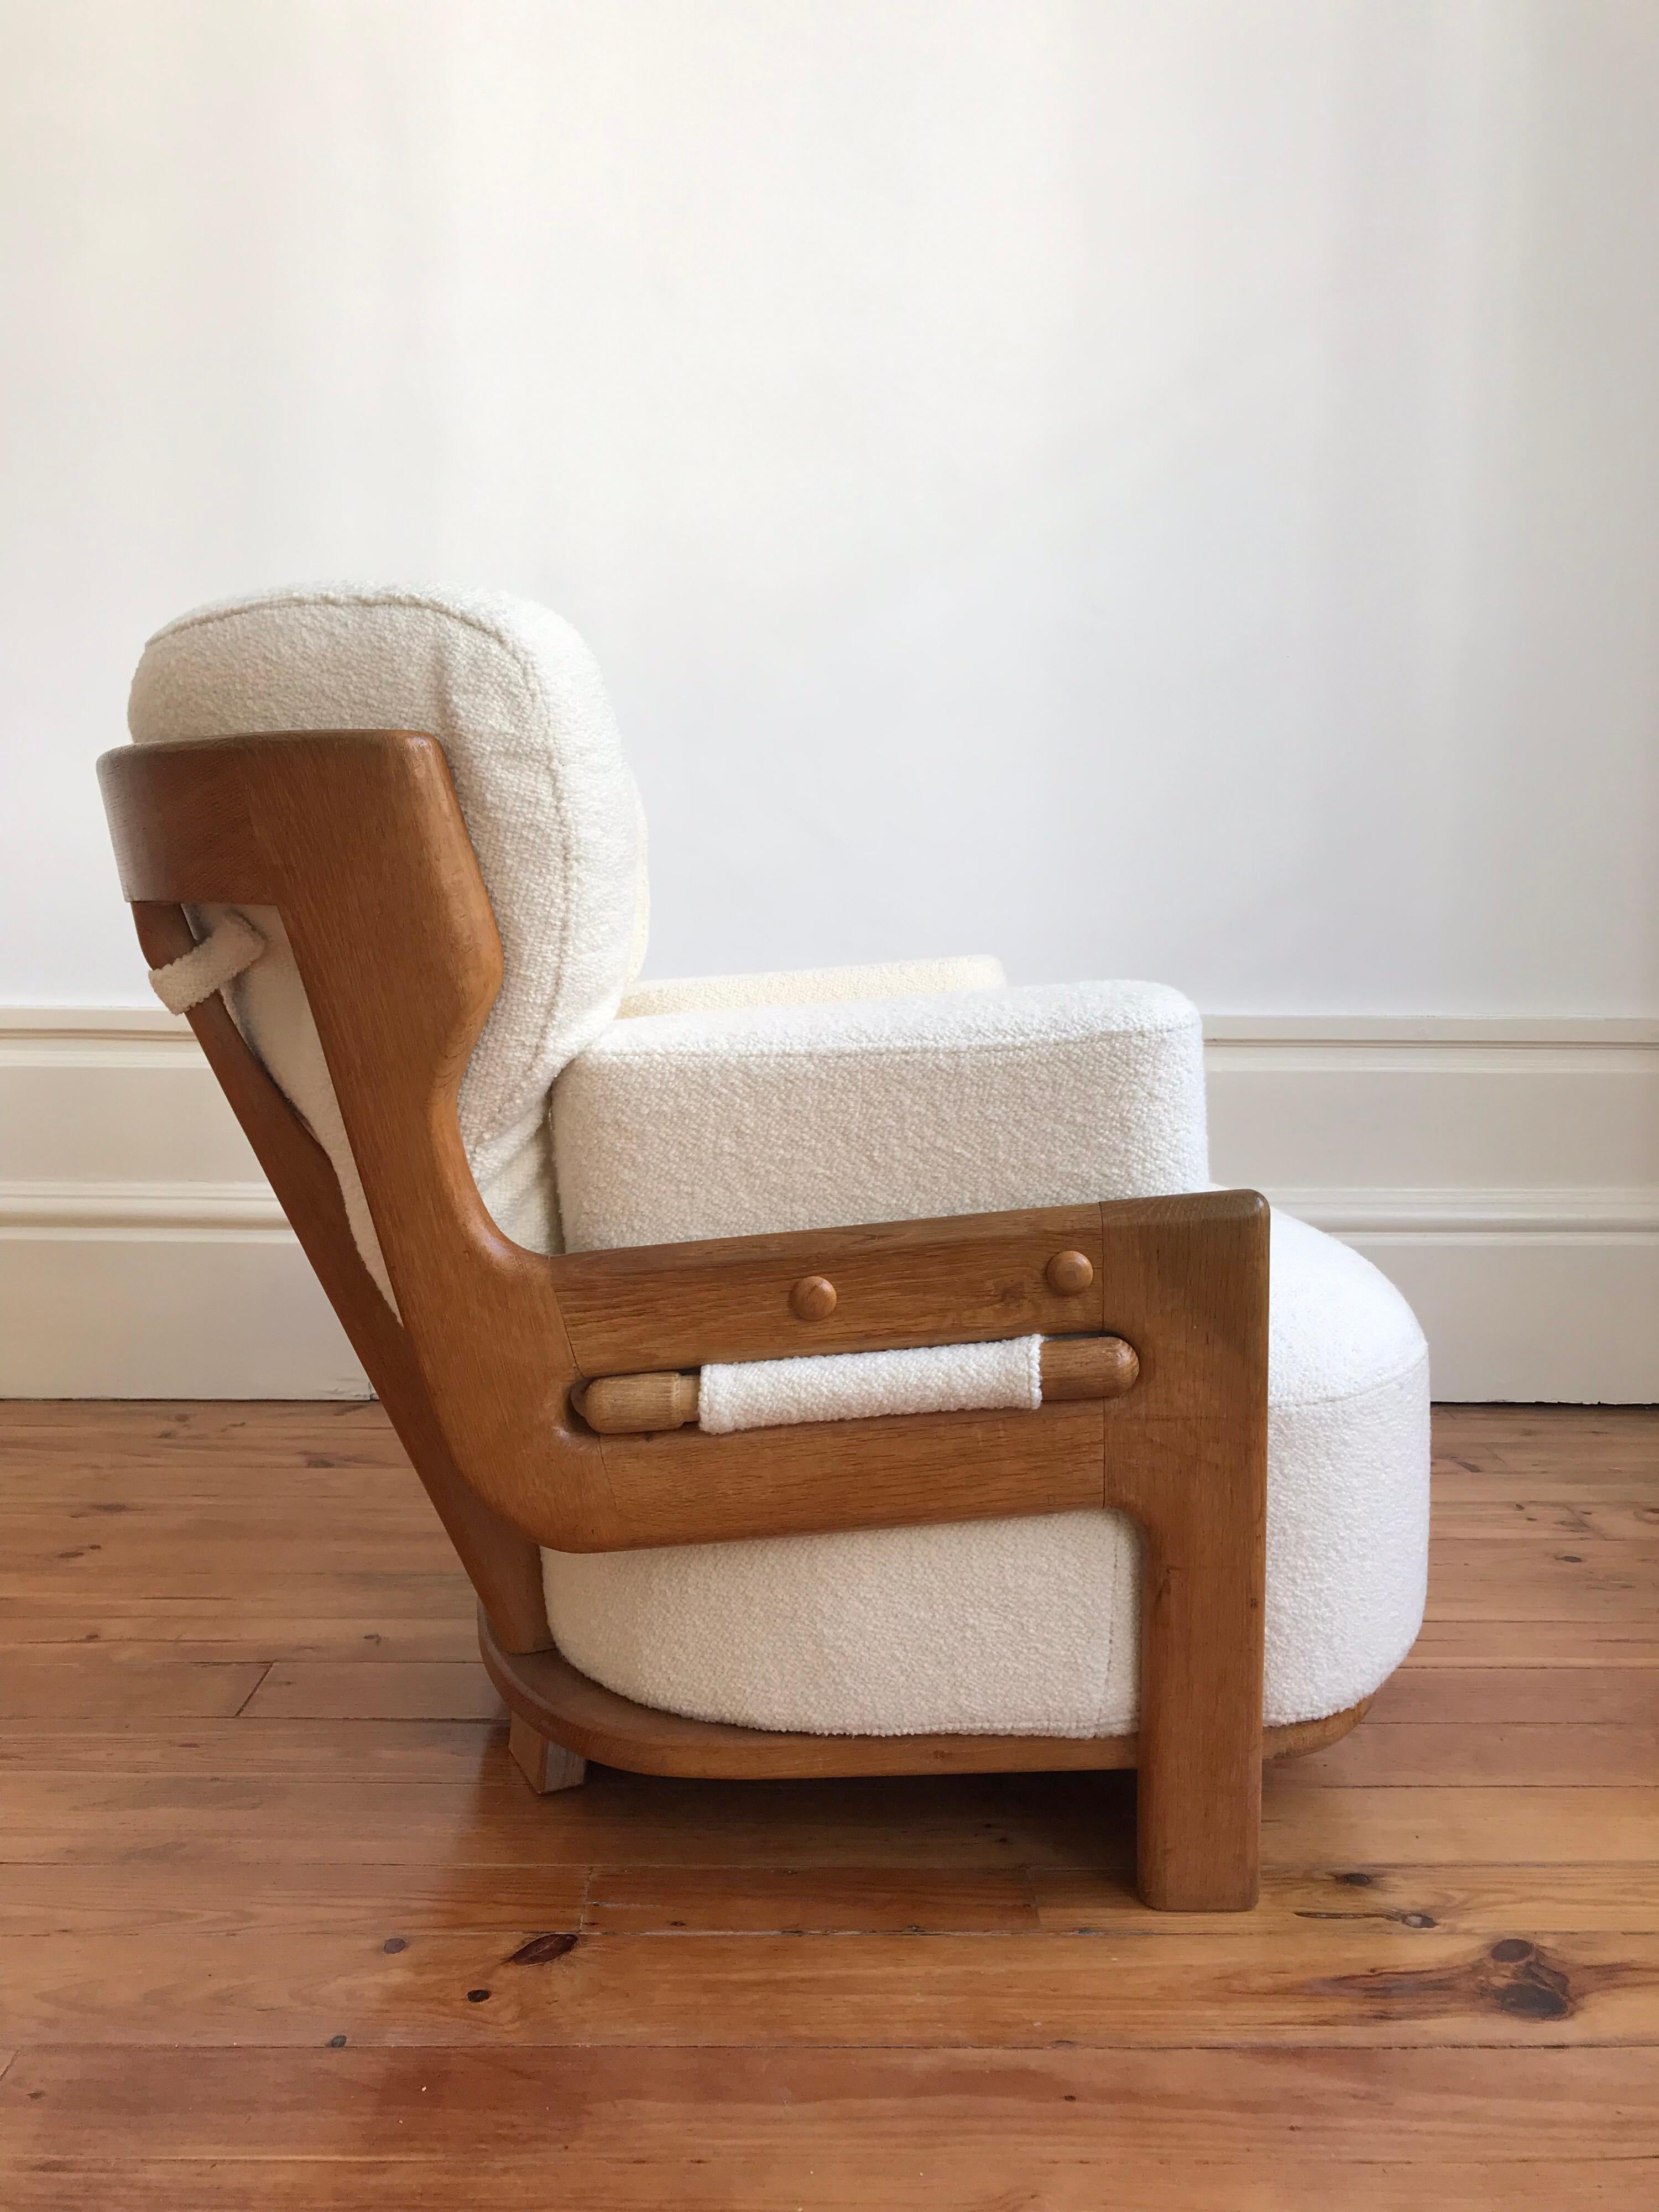 Armchair model Denis by Guillerme Chambron reupholstered entirely with a Pierre Frey fabric Judith crème.

Robert Guillerme (1913 - 1990) and Jacques Chambron (1914 - 2001).
Their company, Votre Maison, has marked the history of French design.